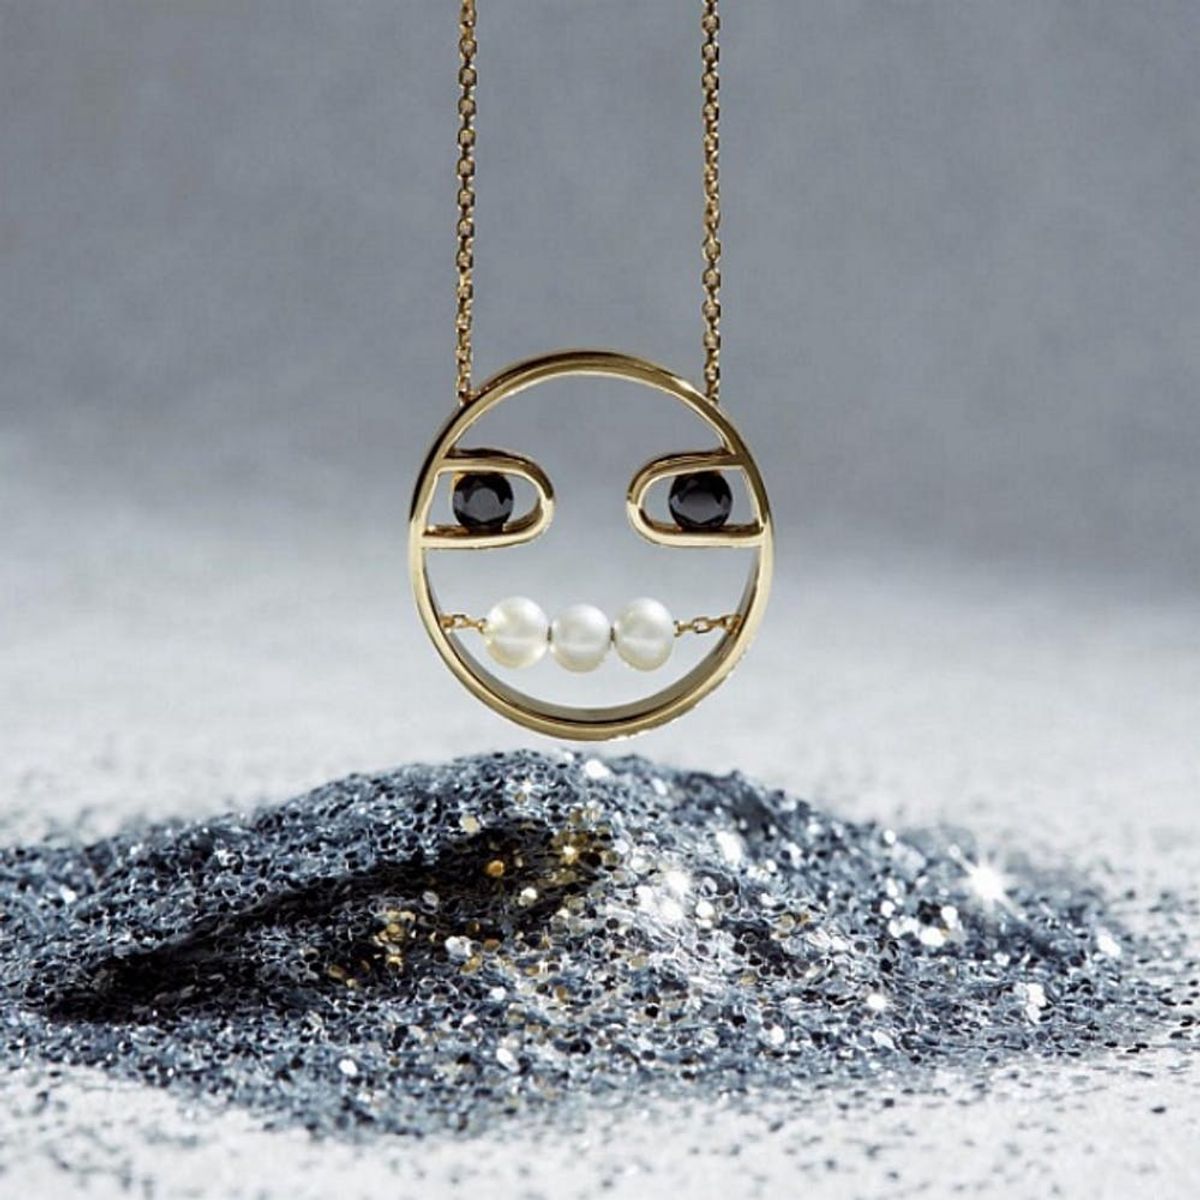 This High-End Emoji Jewelry Line Is Giving Us Heart Eyes